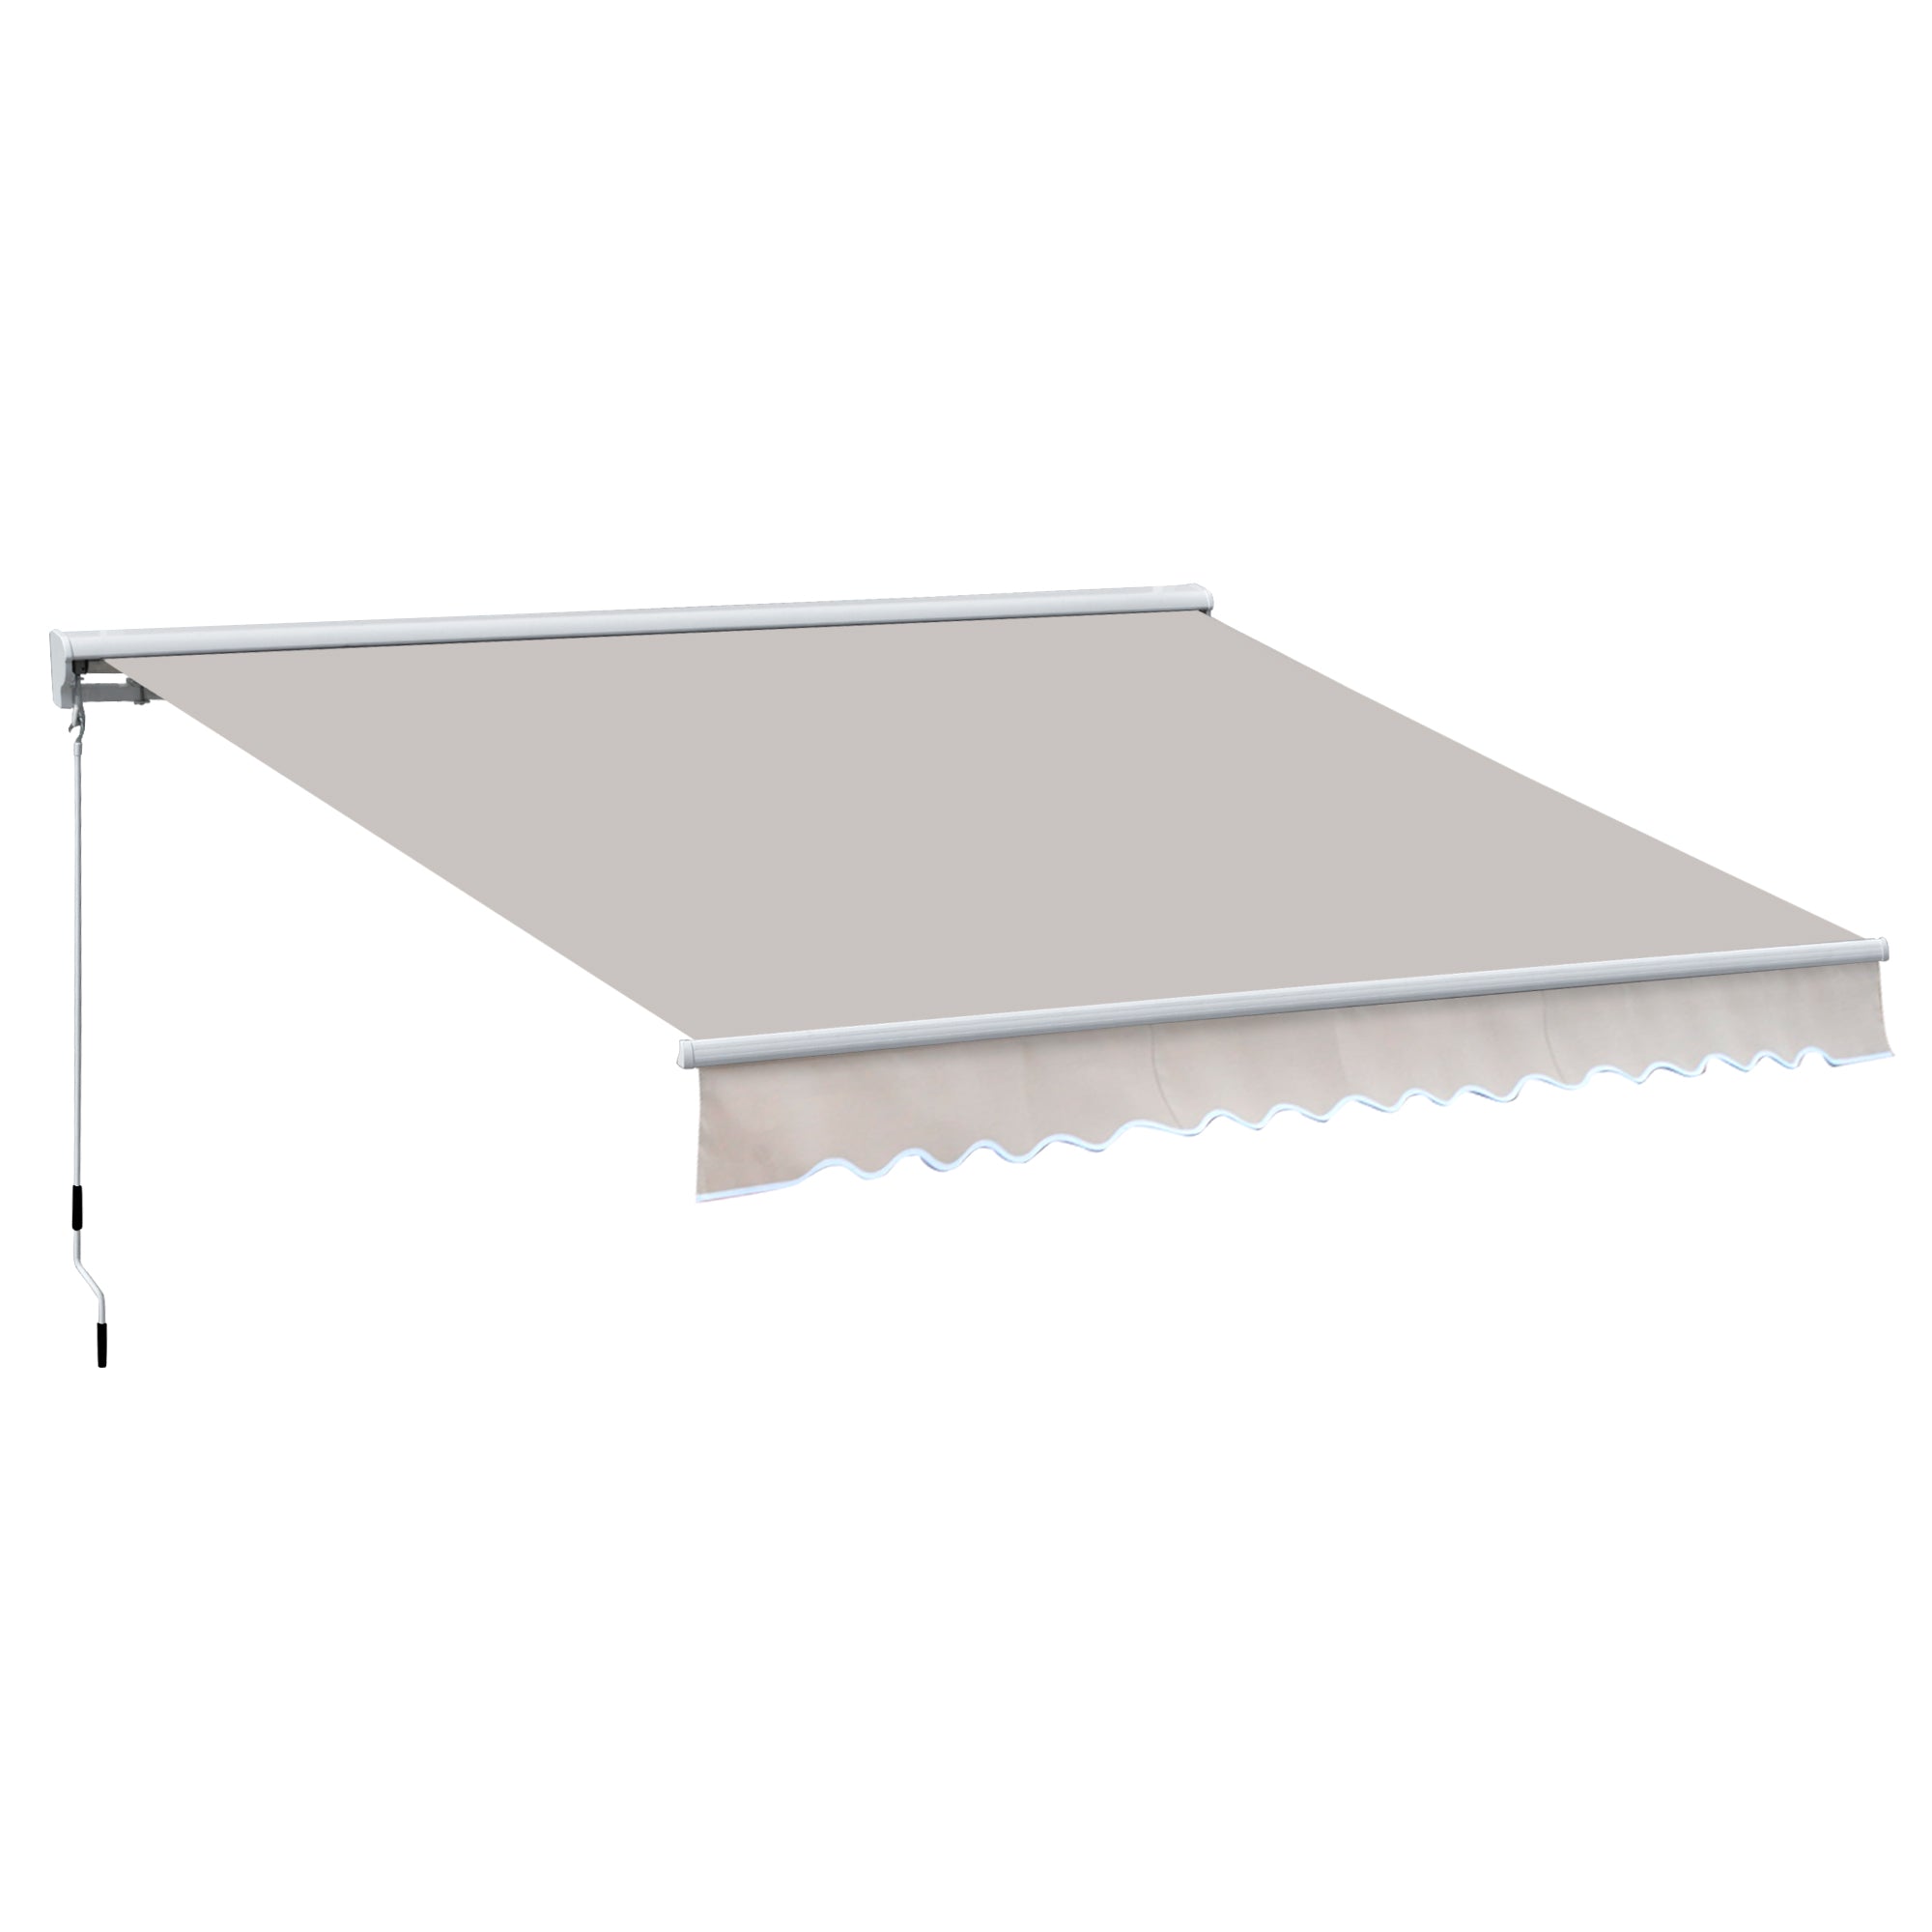 Outsunny Garden Door Awning Retractable Canopy Electric Patio Shelter 3.5M  | TJ Hughes